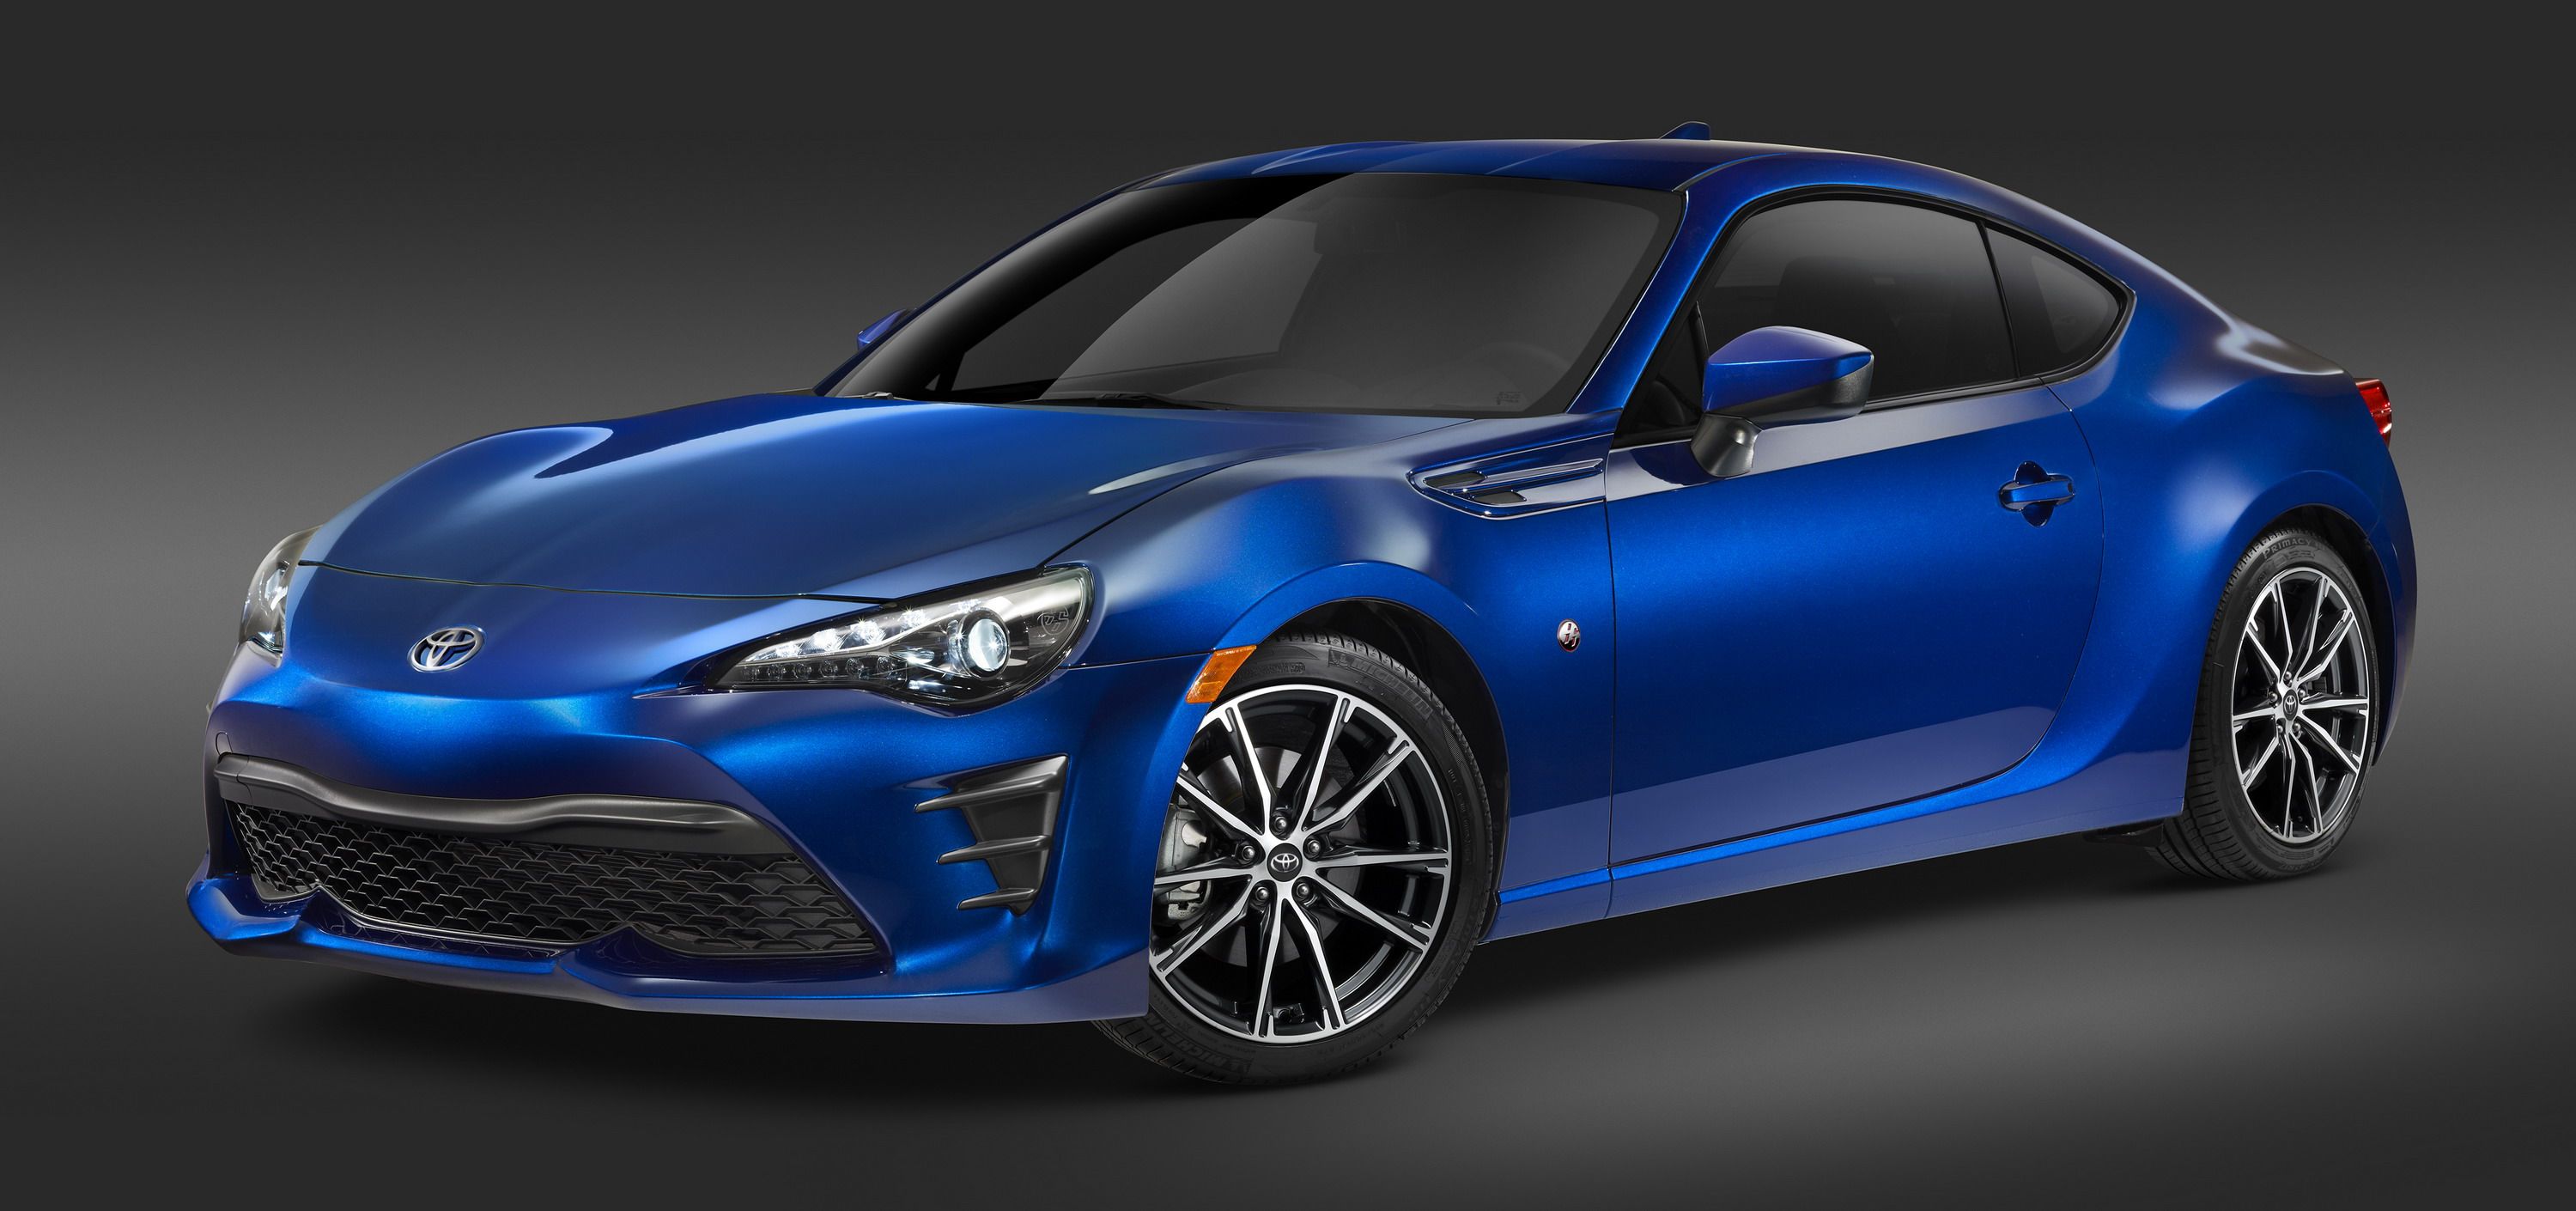 2019 Chief Engineer of the Toyota 86 and Subaru BRZ Says No Turbo for You - Not in this Generation, Buddy